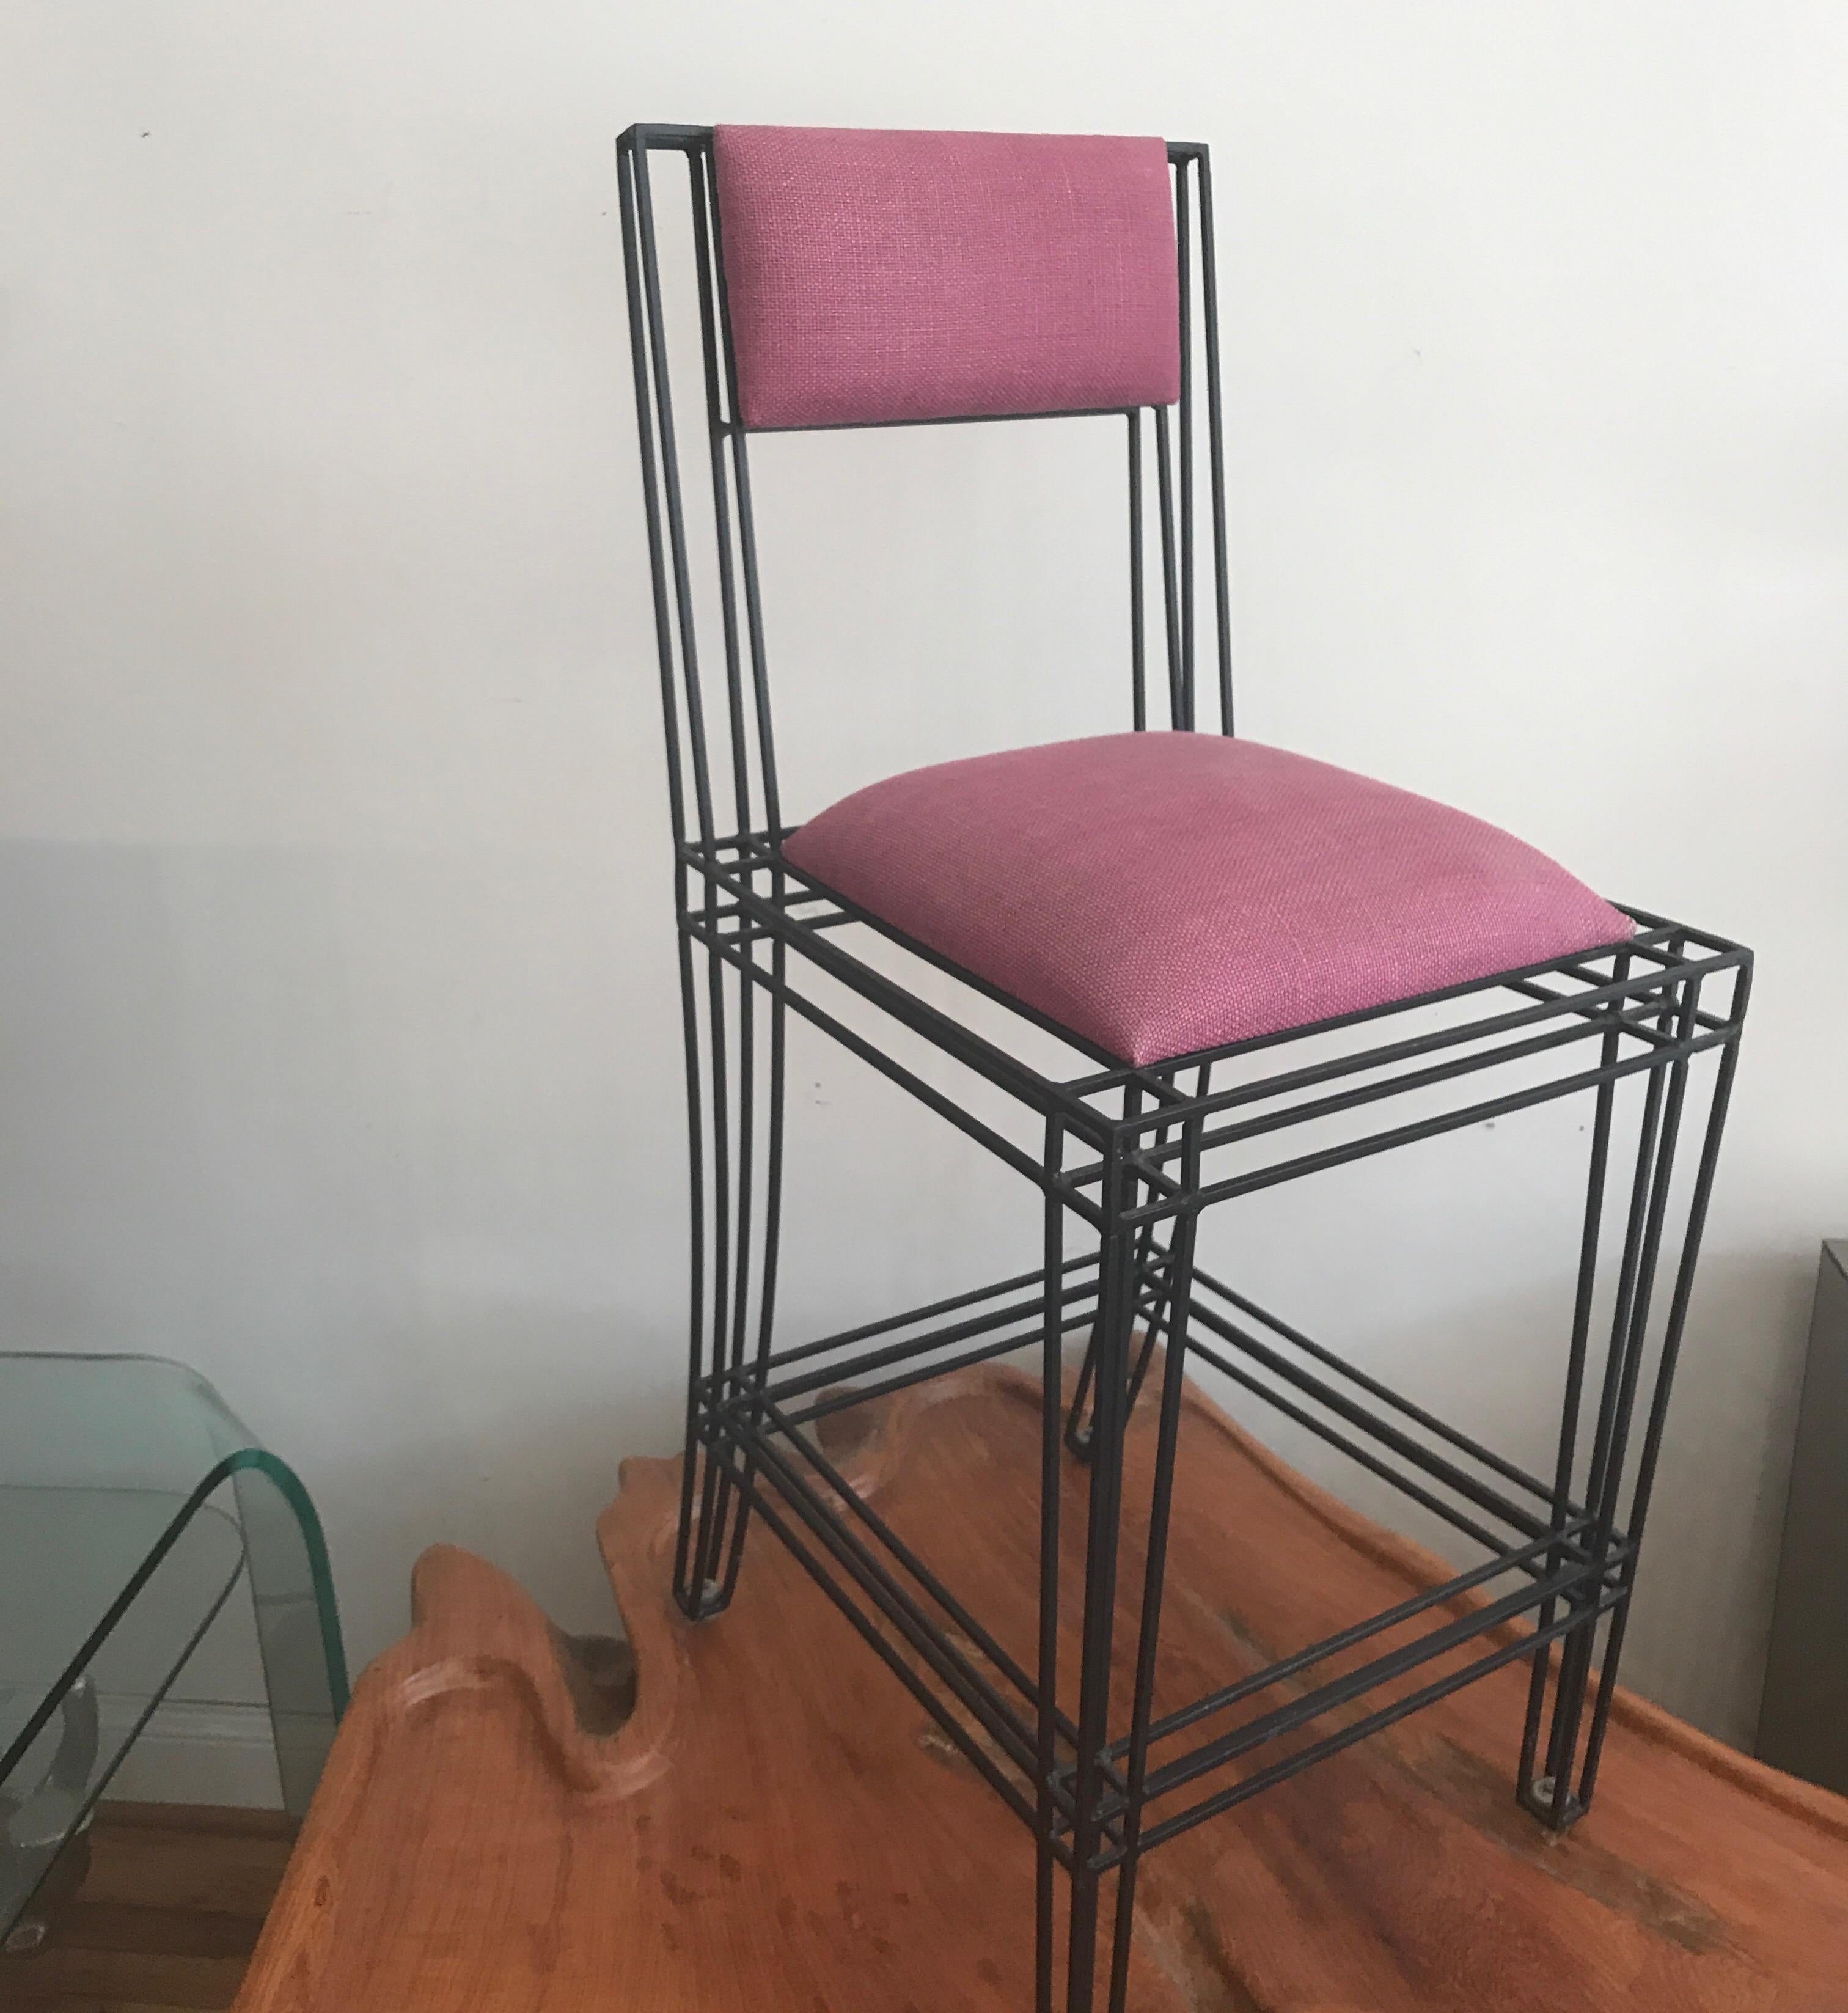 Black power coated wrought iron bar or counter stools designed by Casamidy utilizing traditional 
artisan methods. Perfect for indoor or outdoor use. Set of four available. Priced individually at $1300 each.
Brand new unused condition.